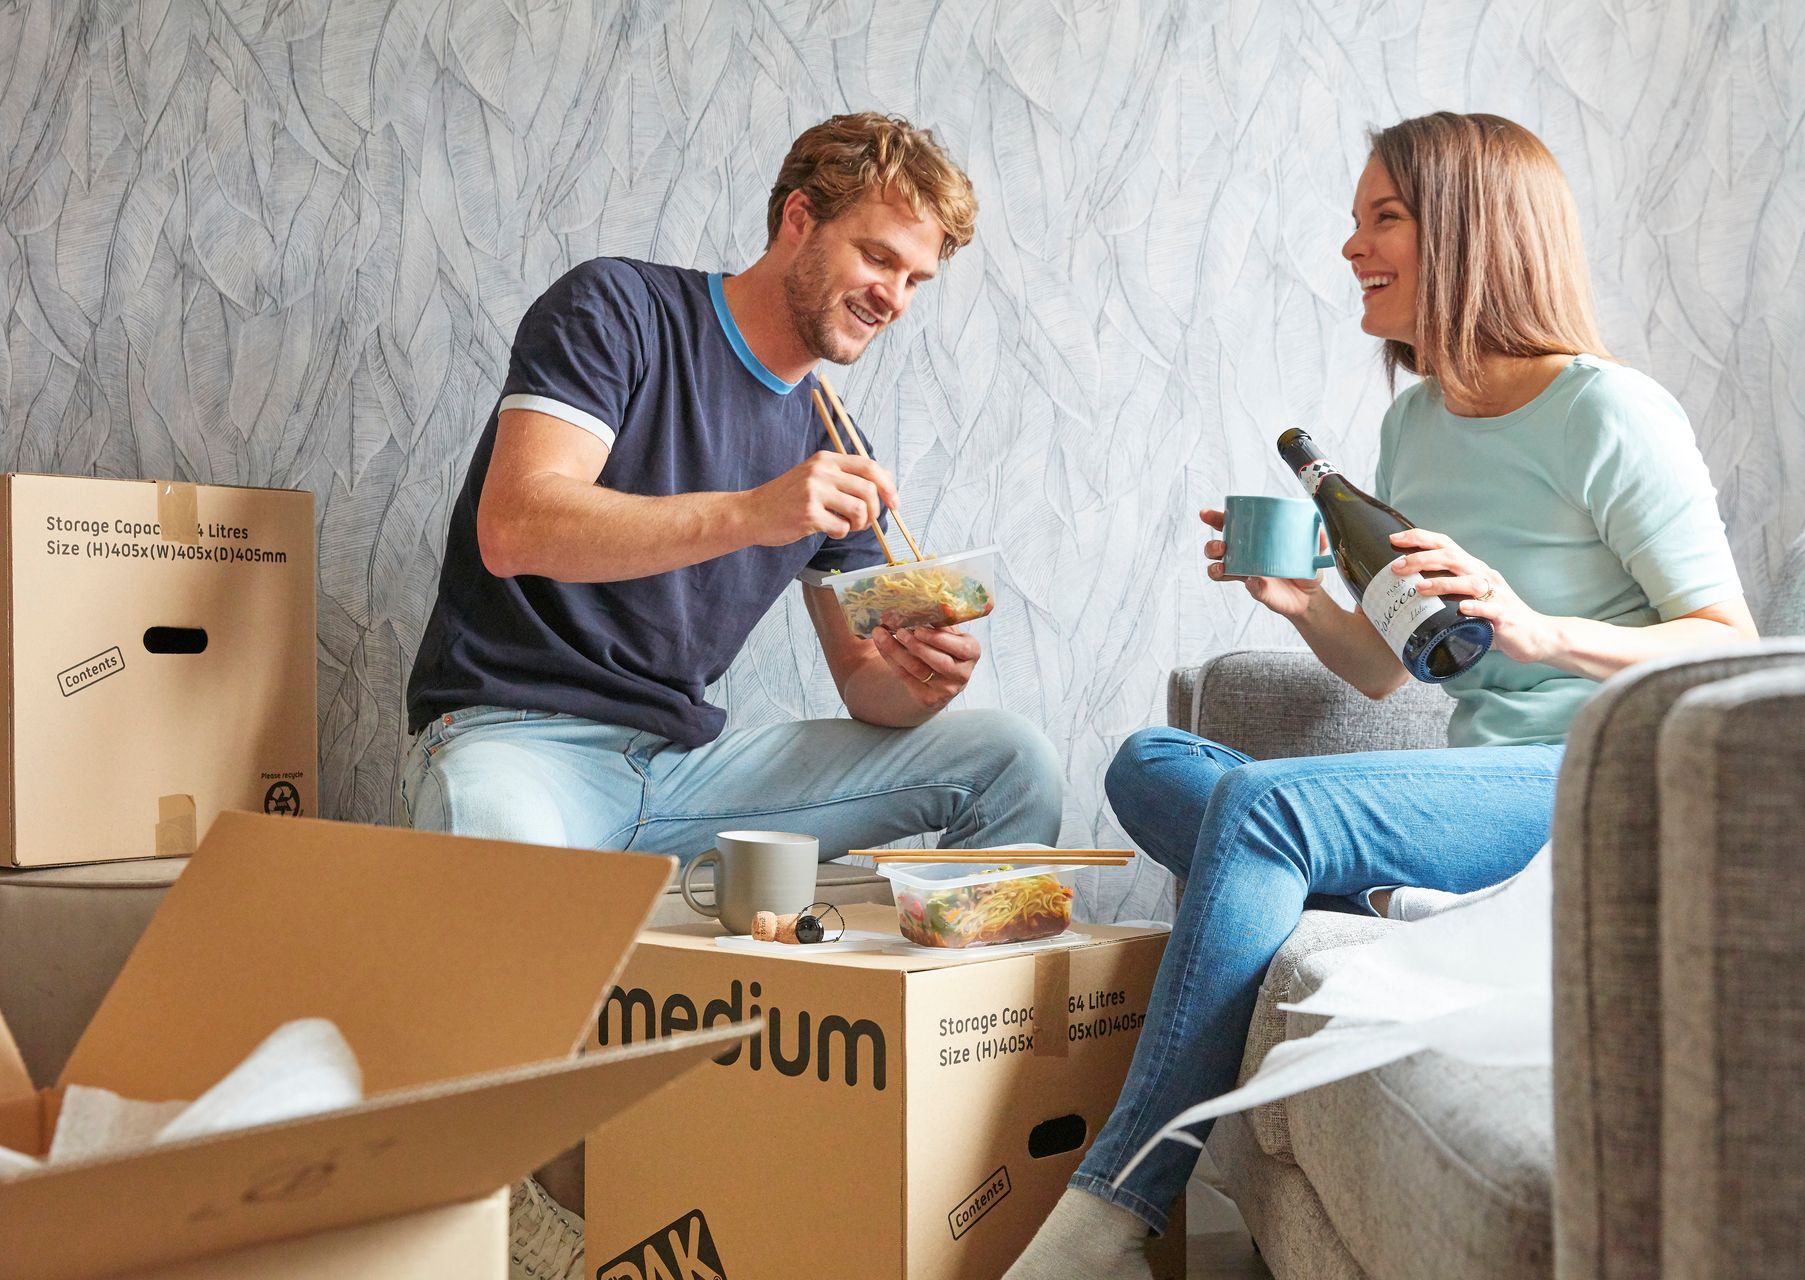 A woman and a man have lunch at a table made of a cardboard box in a show home